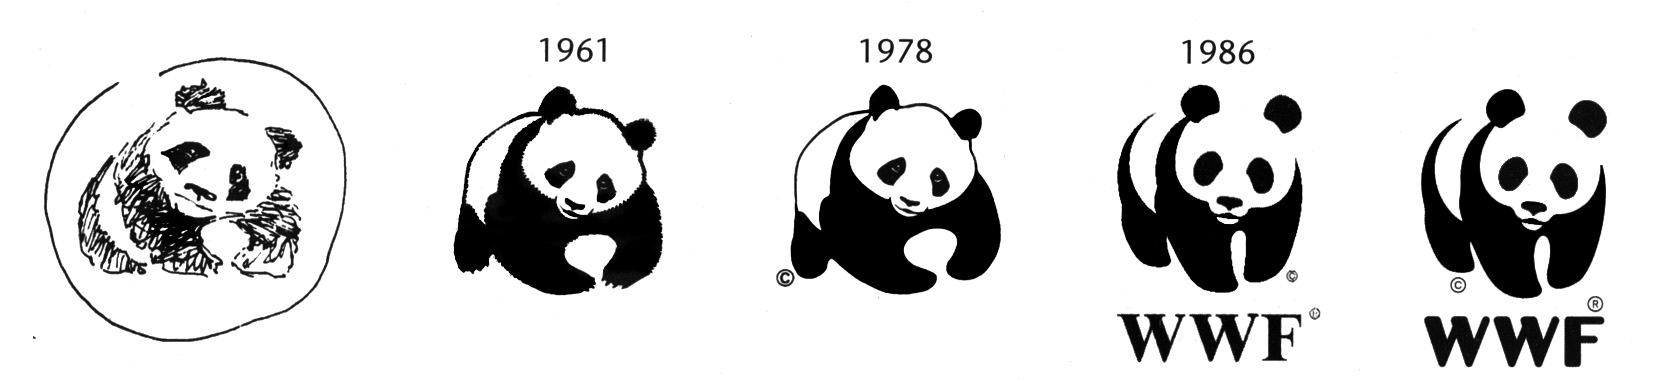 50 years of the WWF logo